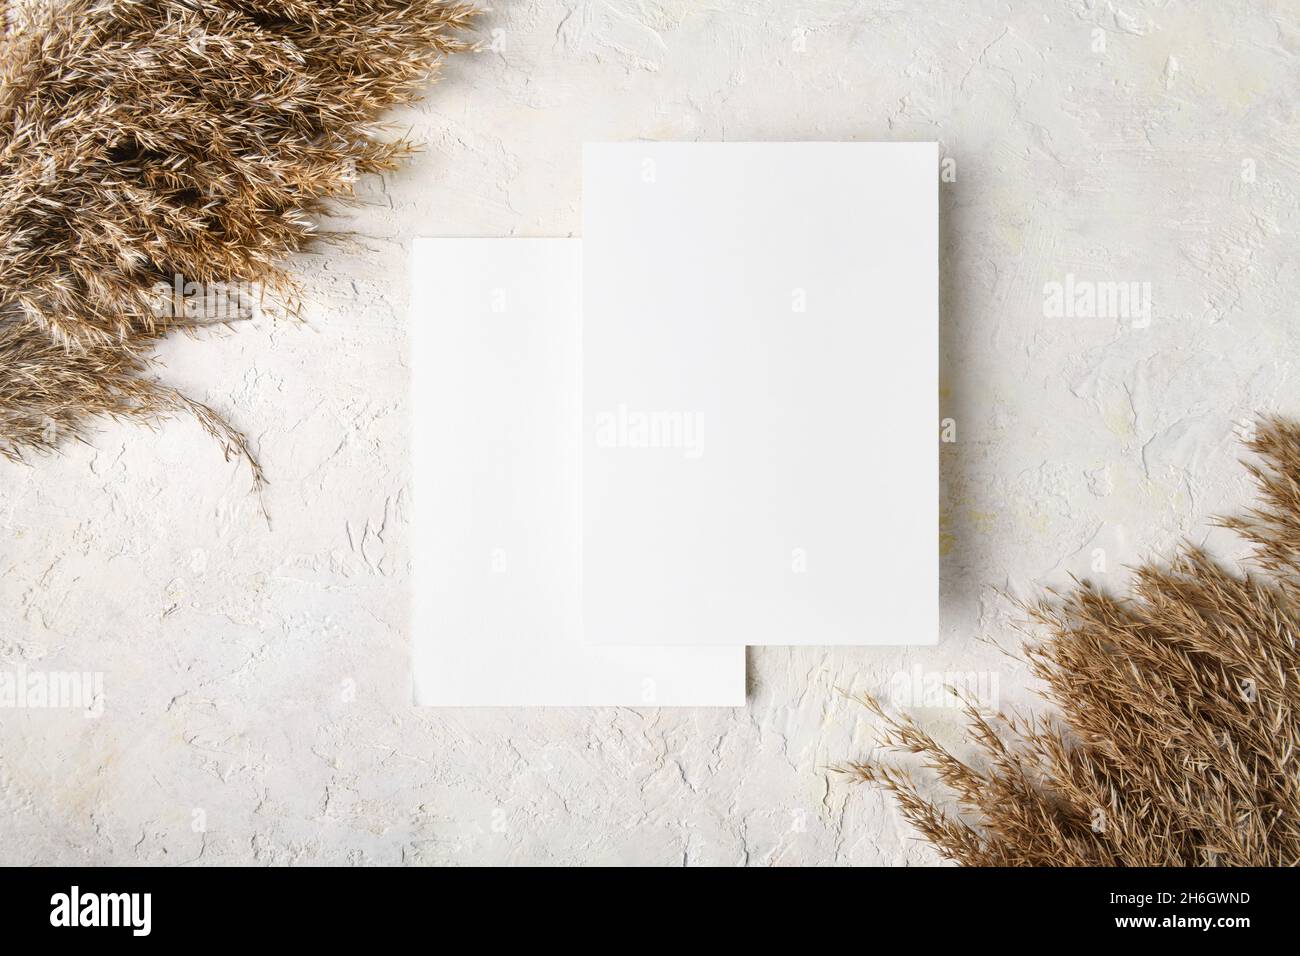 Two white invitation card mockup with boho decoration: pampas grass, natural eco-friendly decor, 5x7 ratio, similar to A6, A5, top view Stock Photo